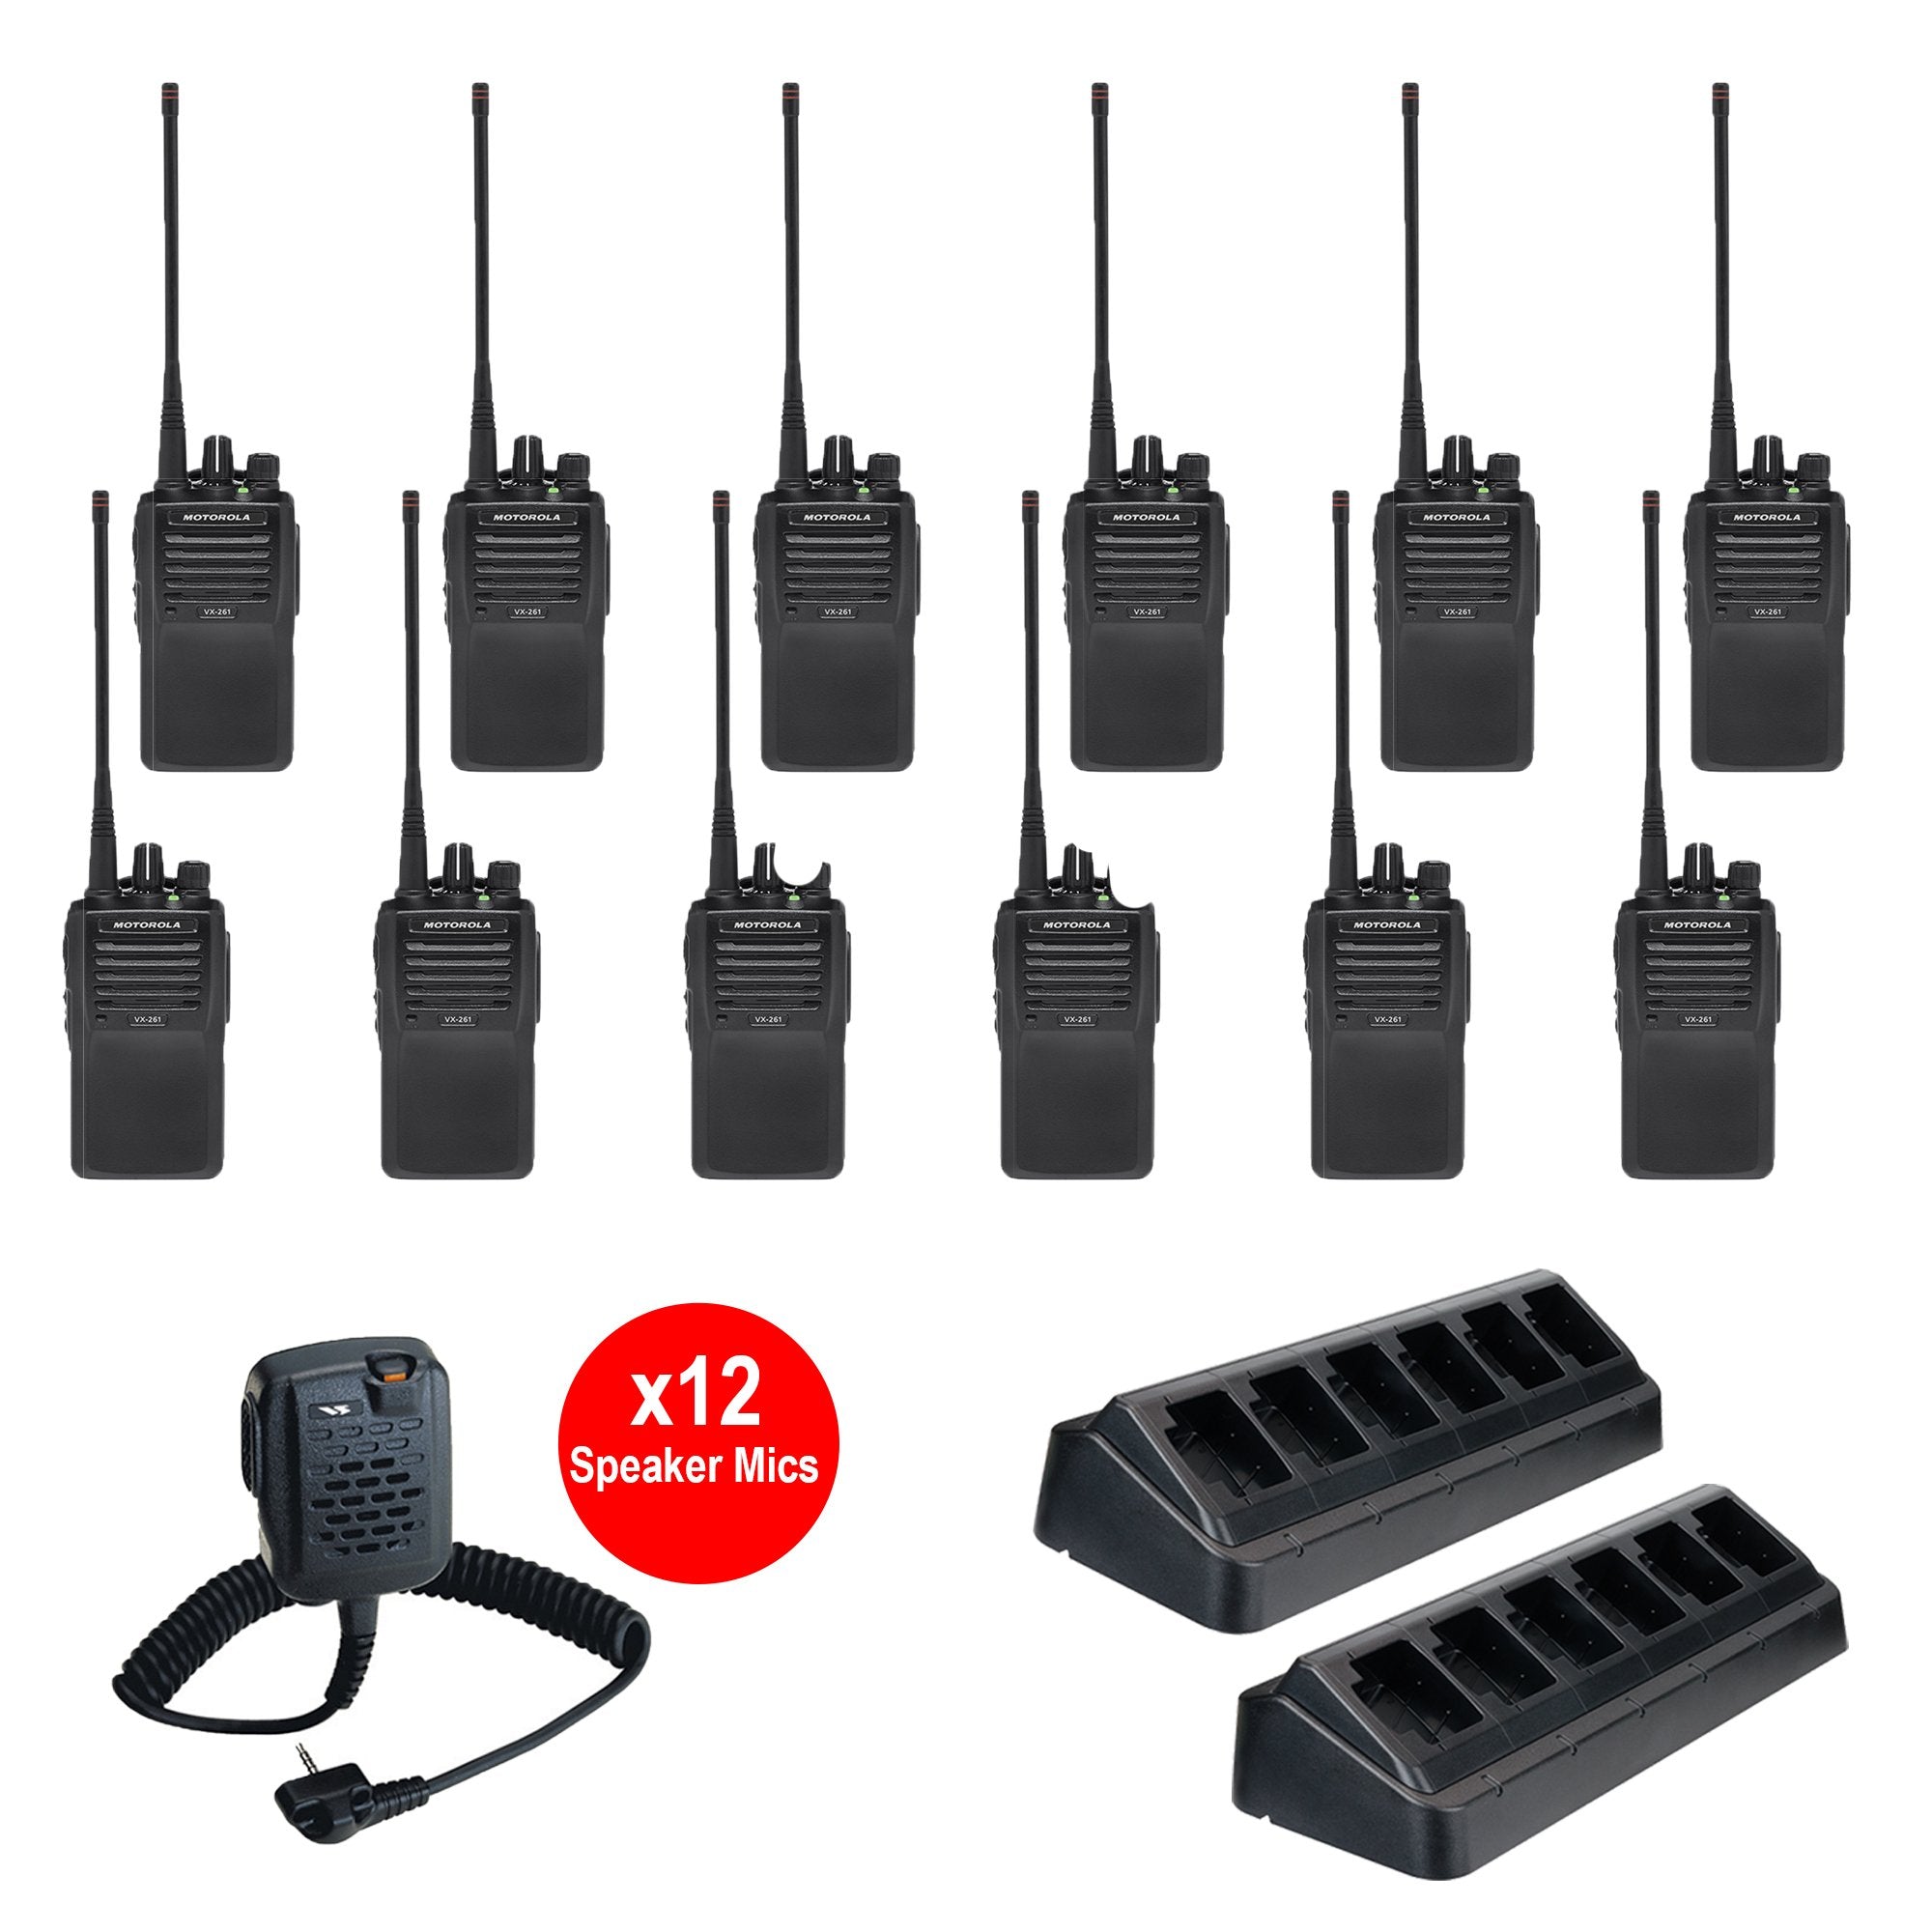 VX-261 5 Watt 16 Channel UHF or VHF Radio 12 pack with multi unit charger and speaker microphones